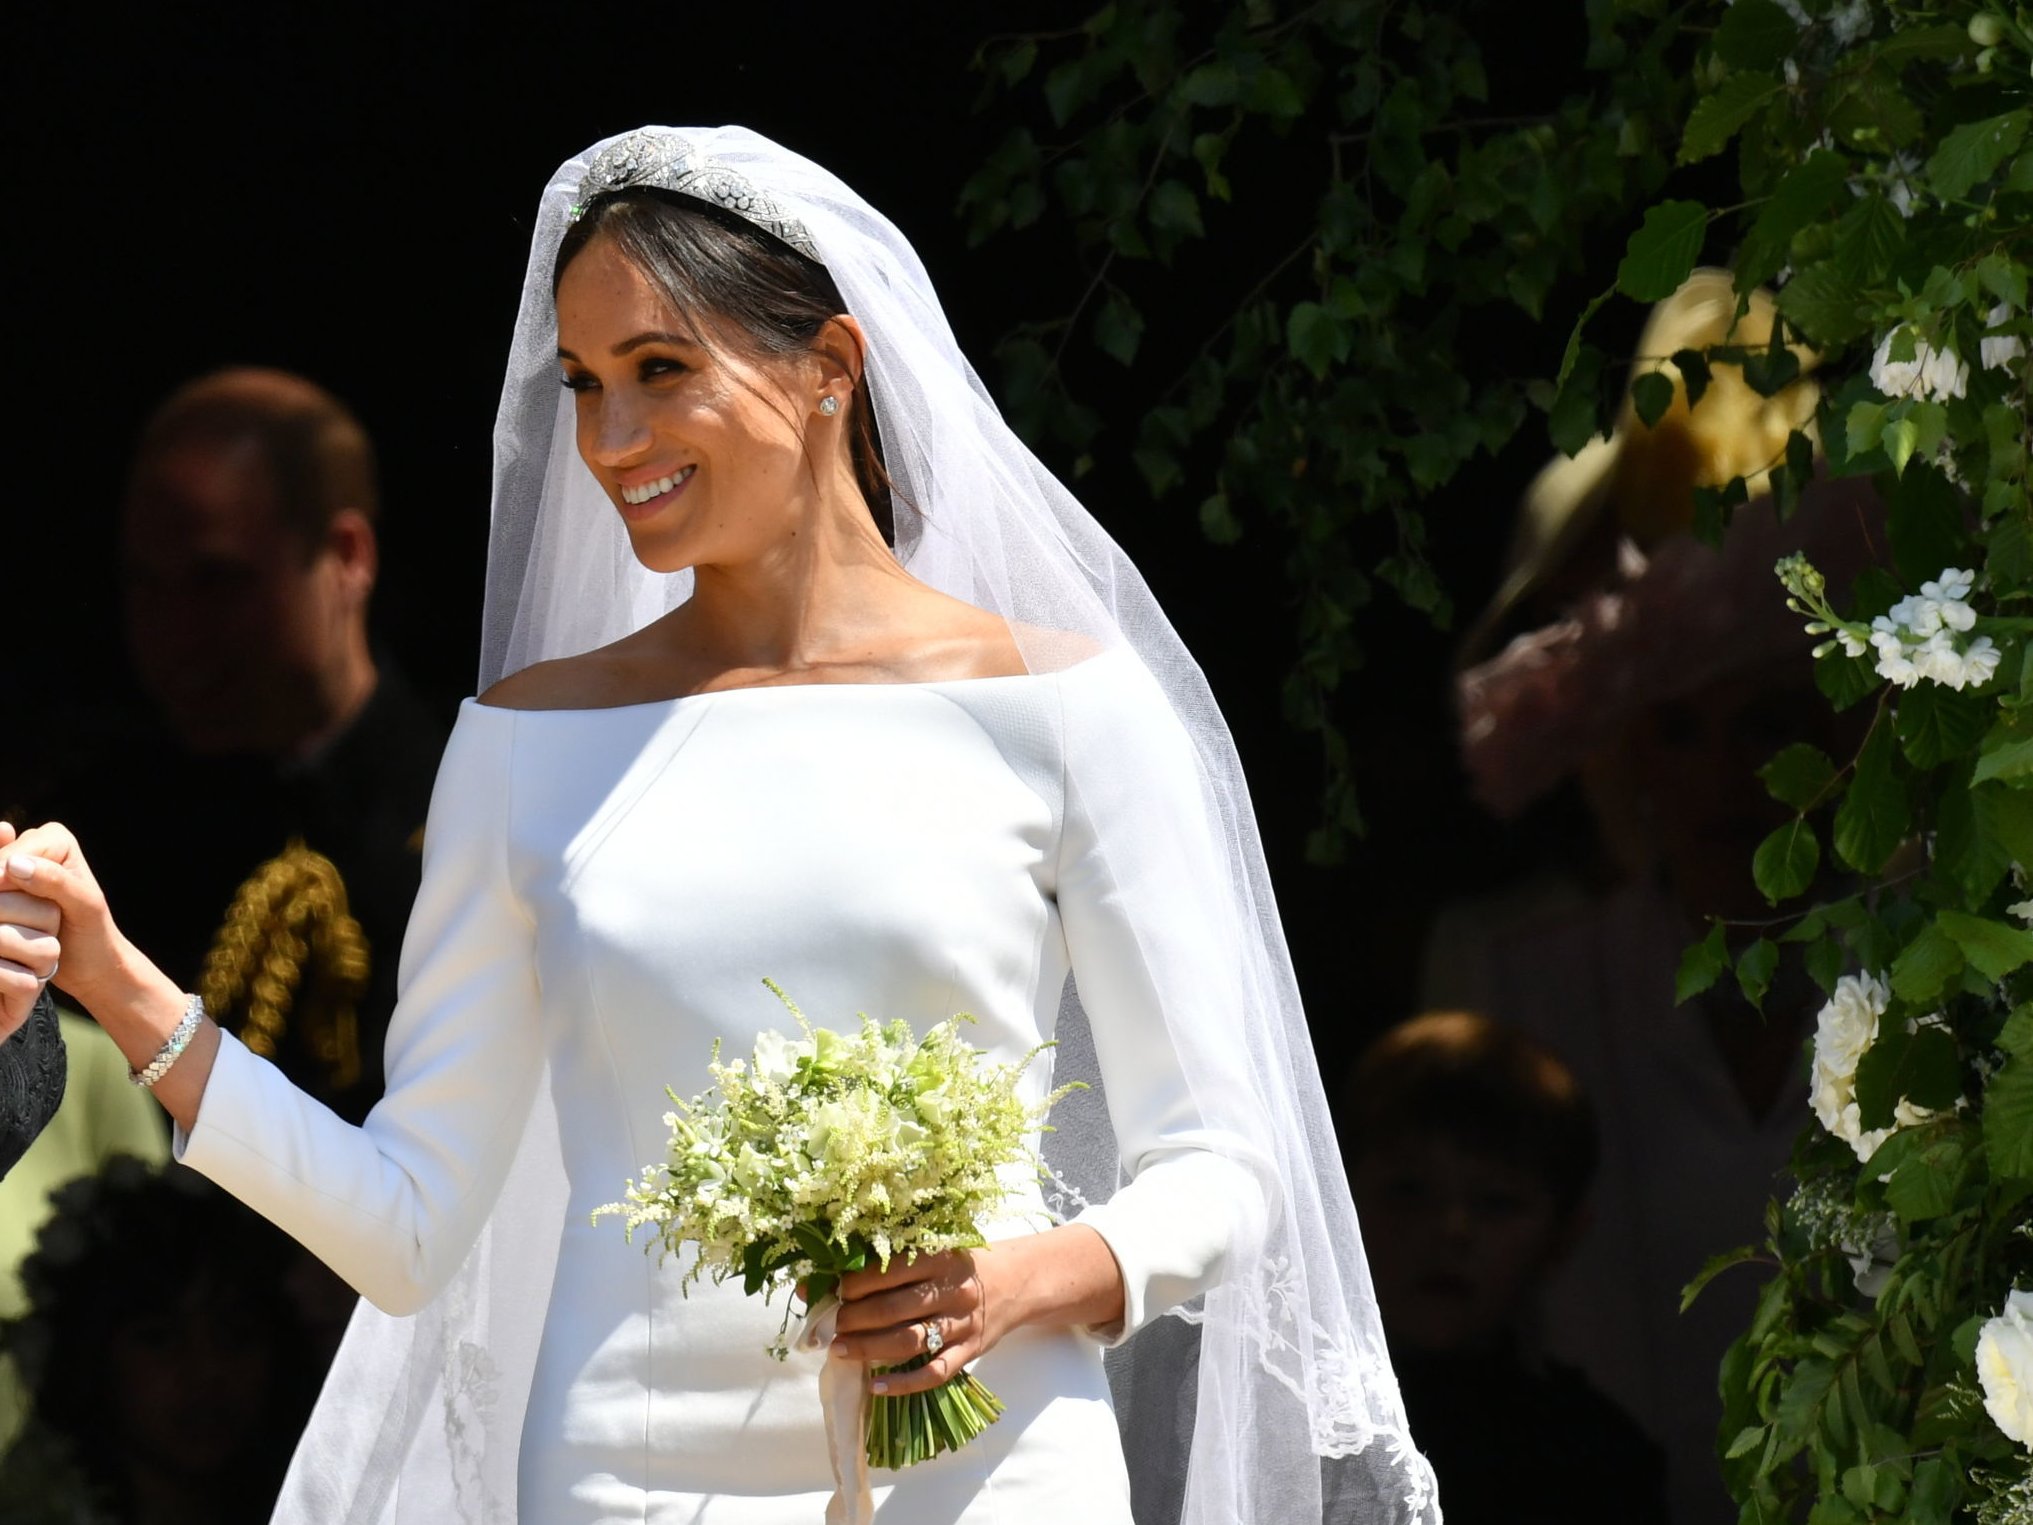 Meghan Markle wedding: What did Meghan wear for her first wedding dress? |  Royal | News | Express.co.uk